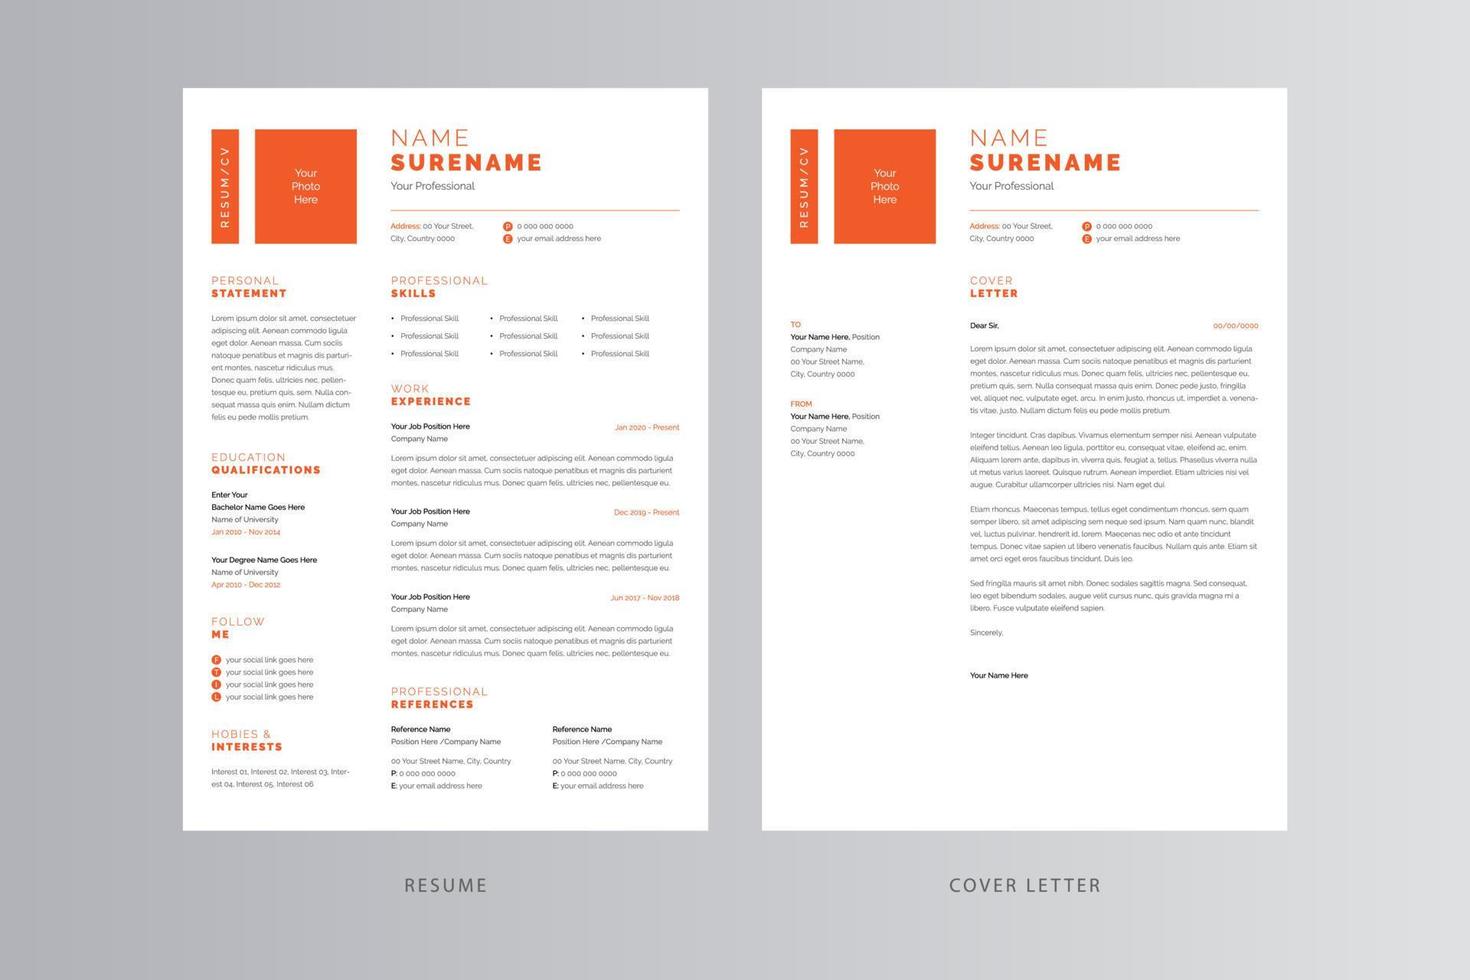 Professional Resume and Cover Letter Template. Pro Vector